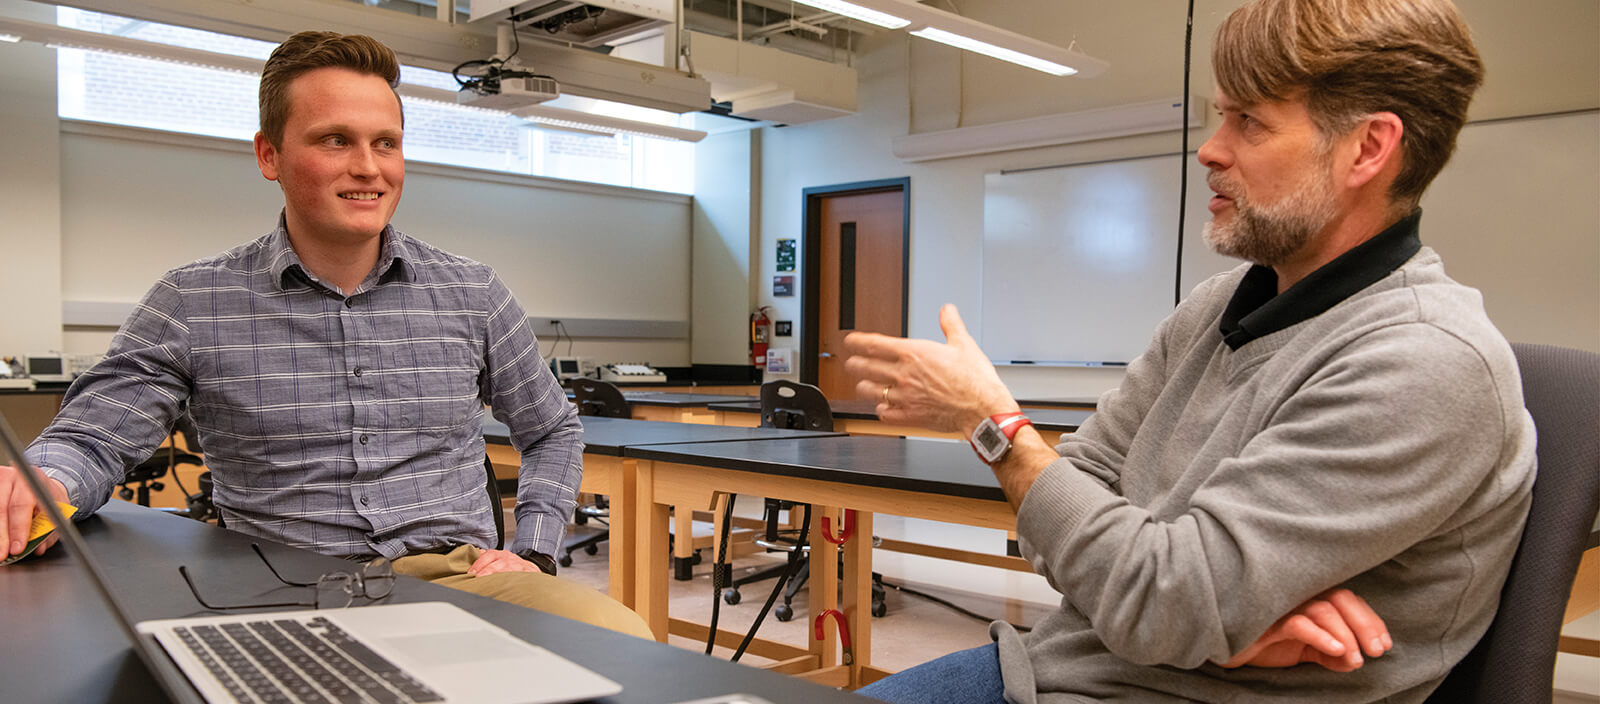 A student and a professor have a conversation in a science lab.